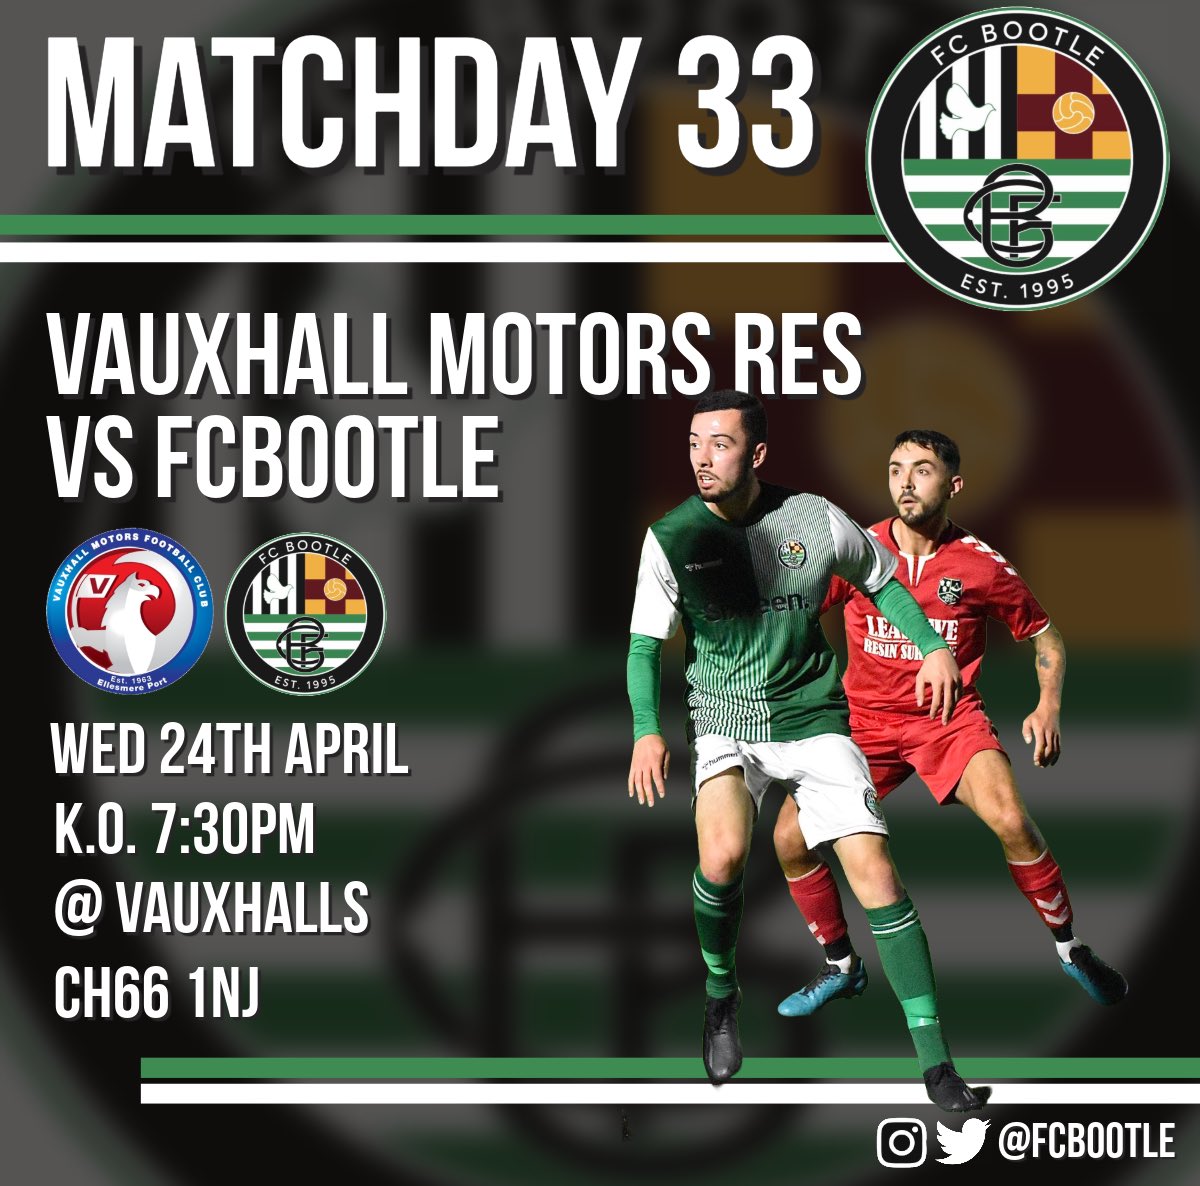 Next match… We take on @vmfc_Res at Vauxhalls this Wednesday. Come down and support the lads 💚